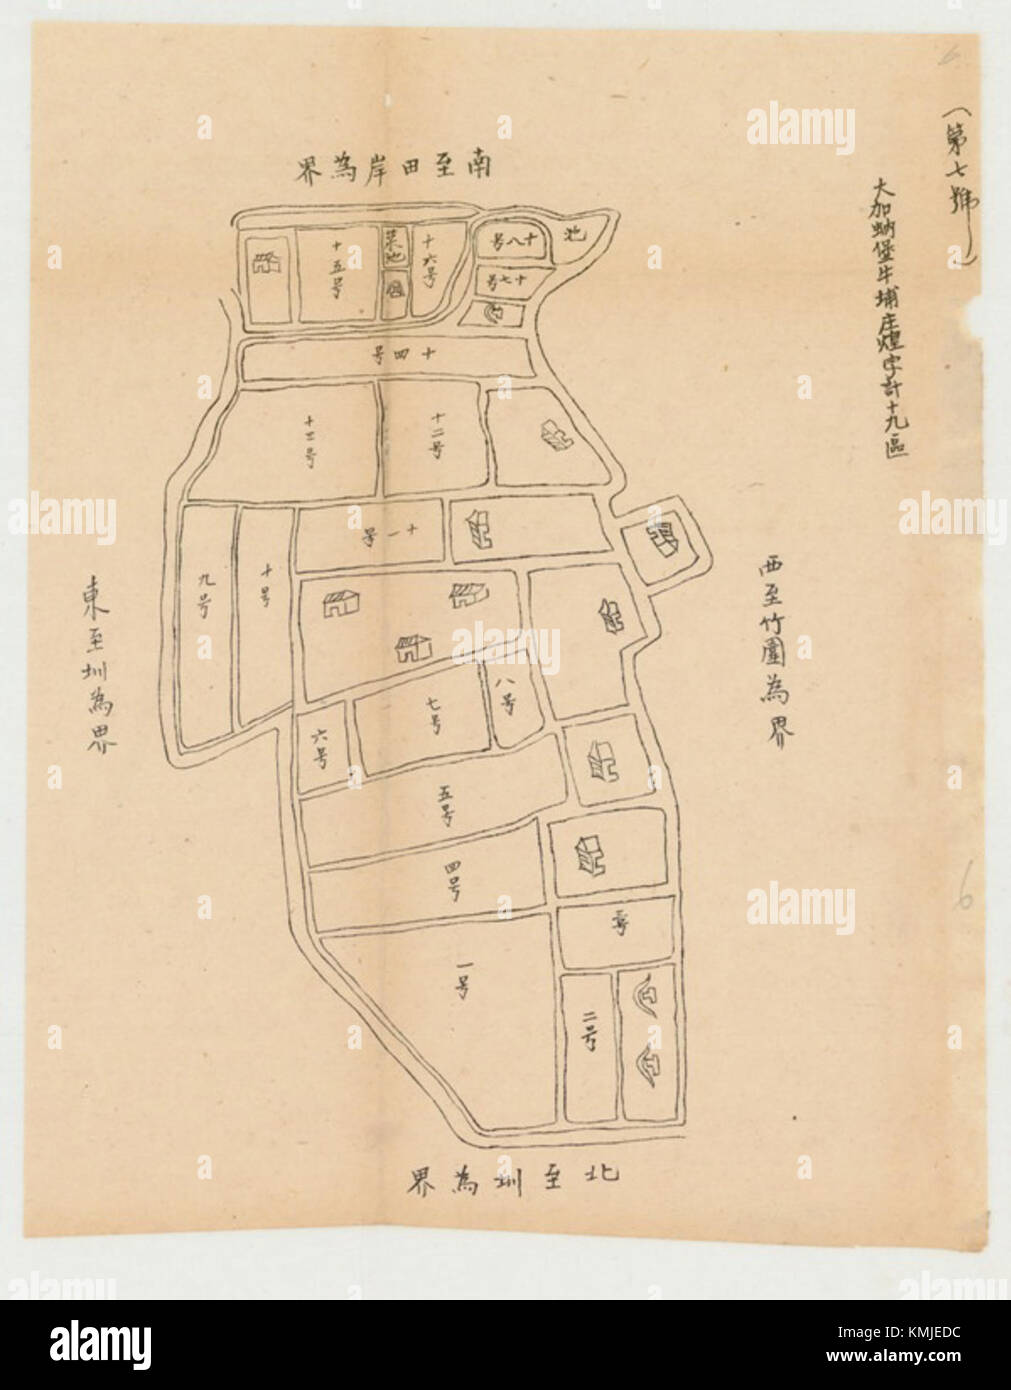 Cadastral Map of Taiwan 1880s Stock Photo